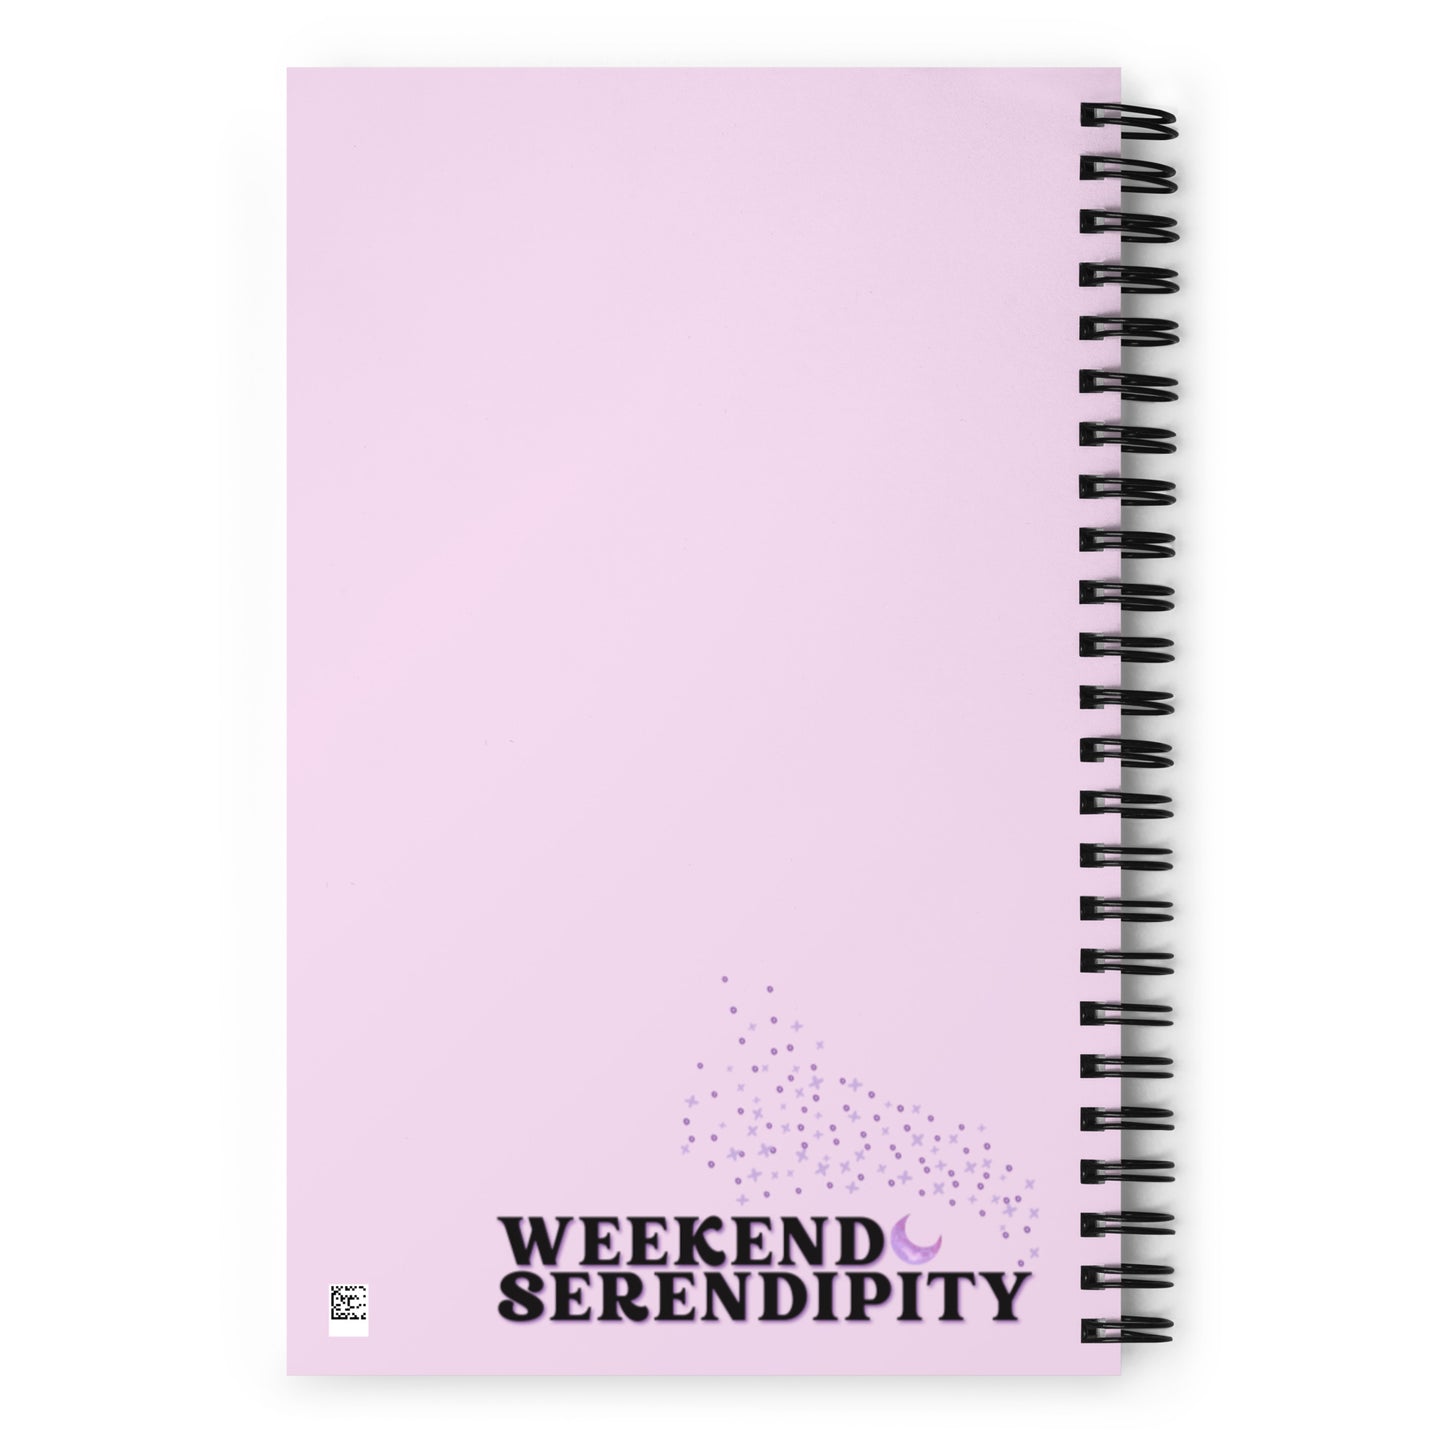 backside of notebook with Weekend Serendipity logo